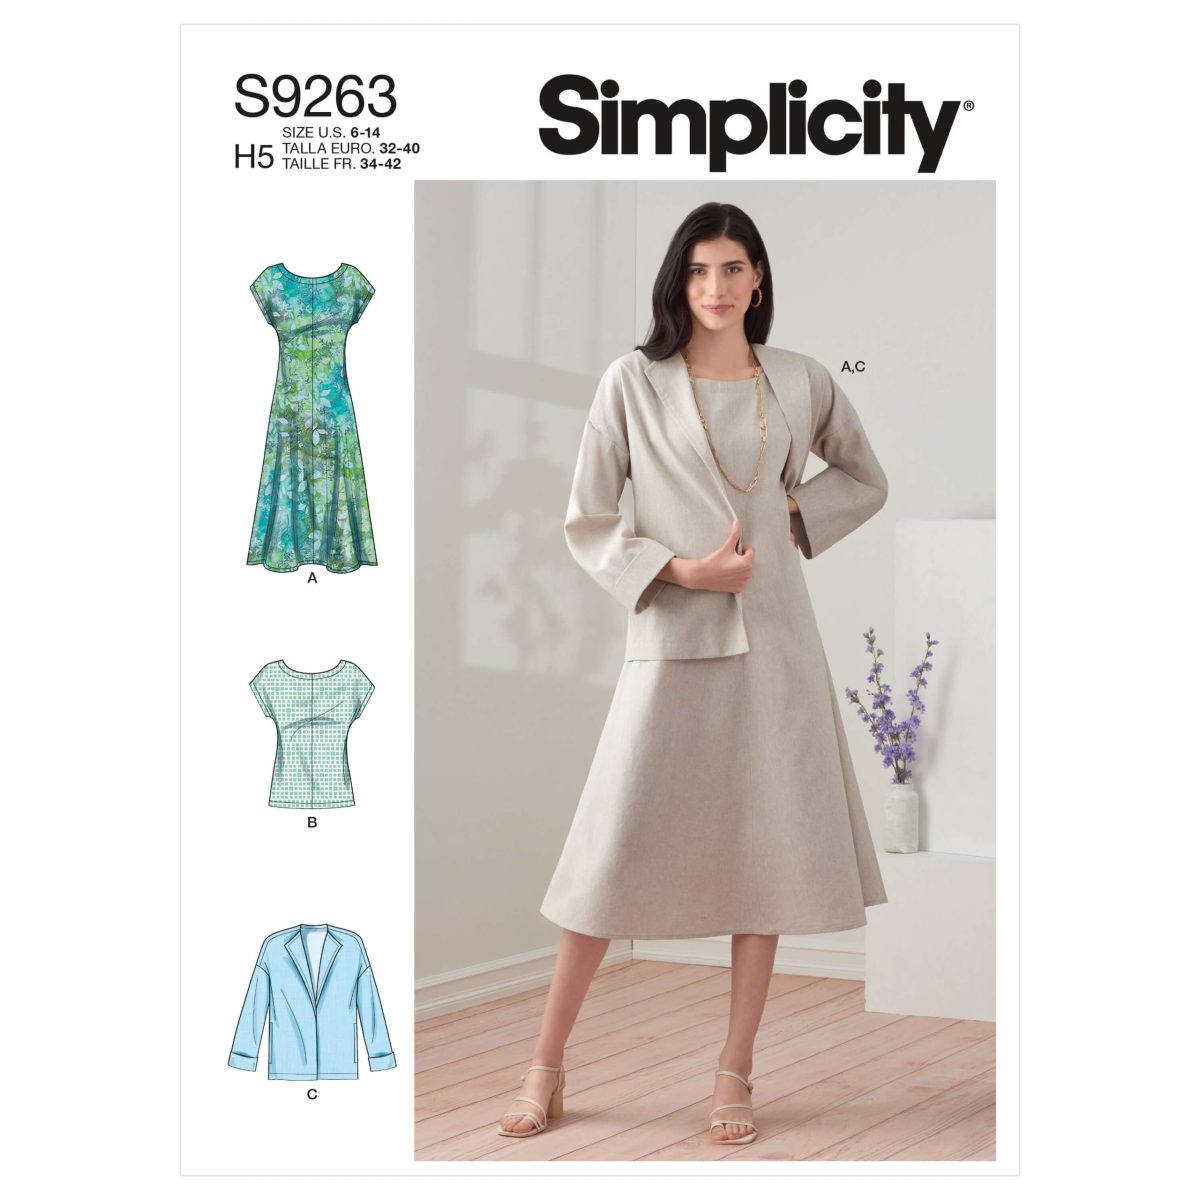 Simplicity Sewing Pattern S9263 Misses' Dress, Jacket and Top